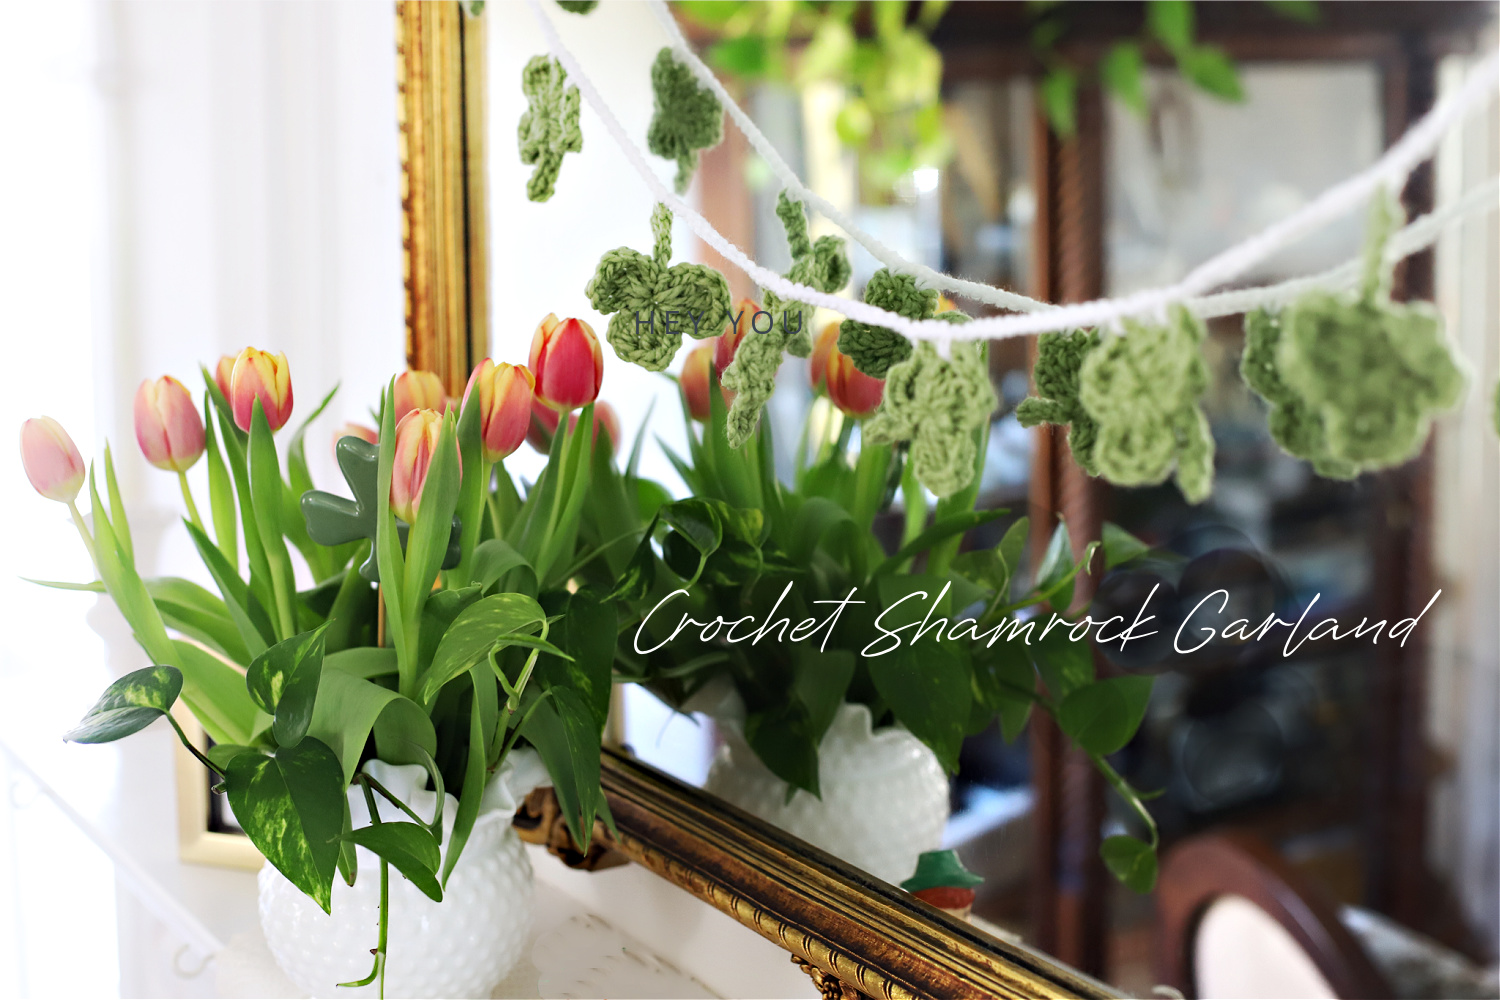 Crochet shamrock garland for S Patrick's Day swaged over mantle mirror